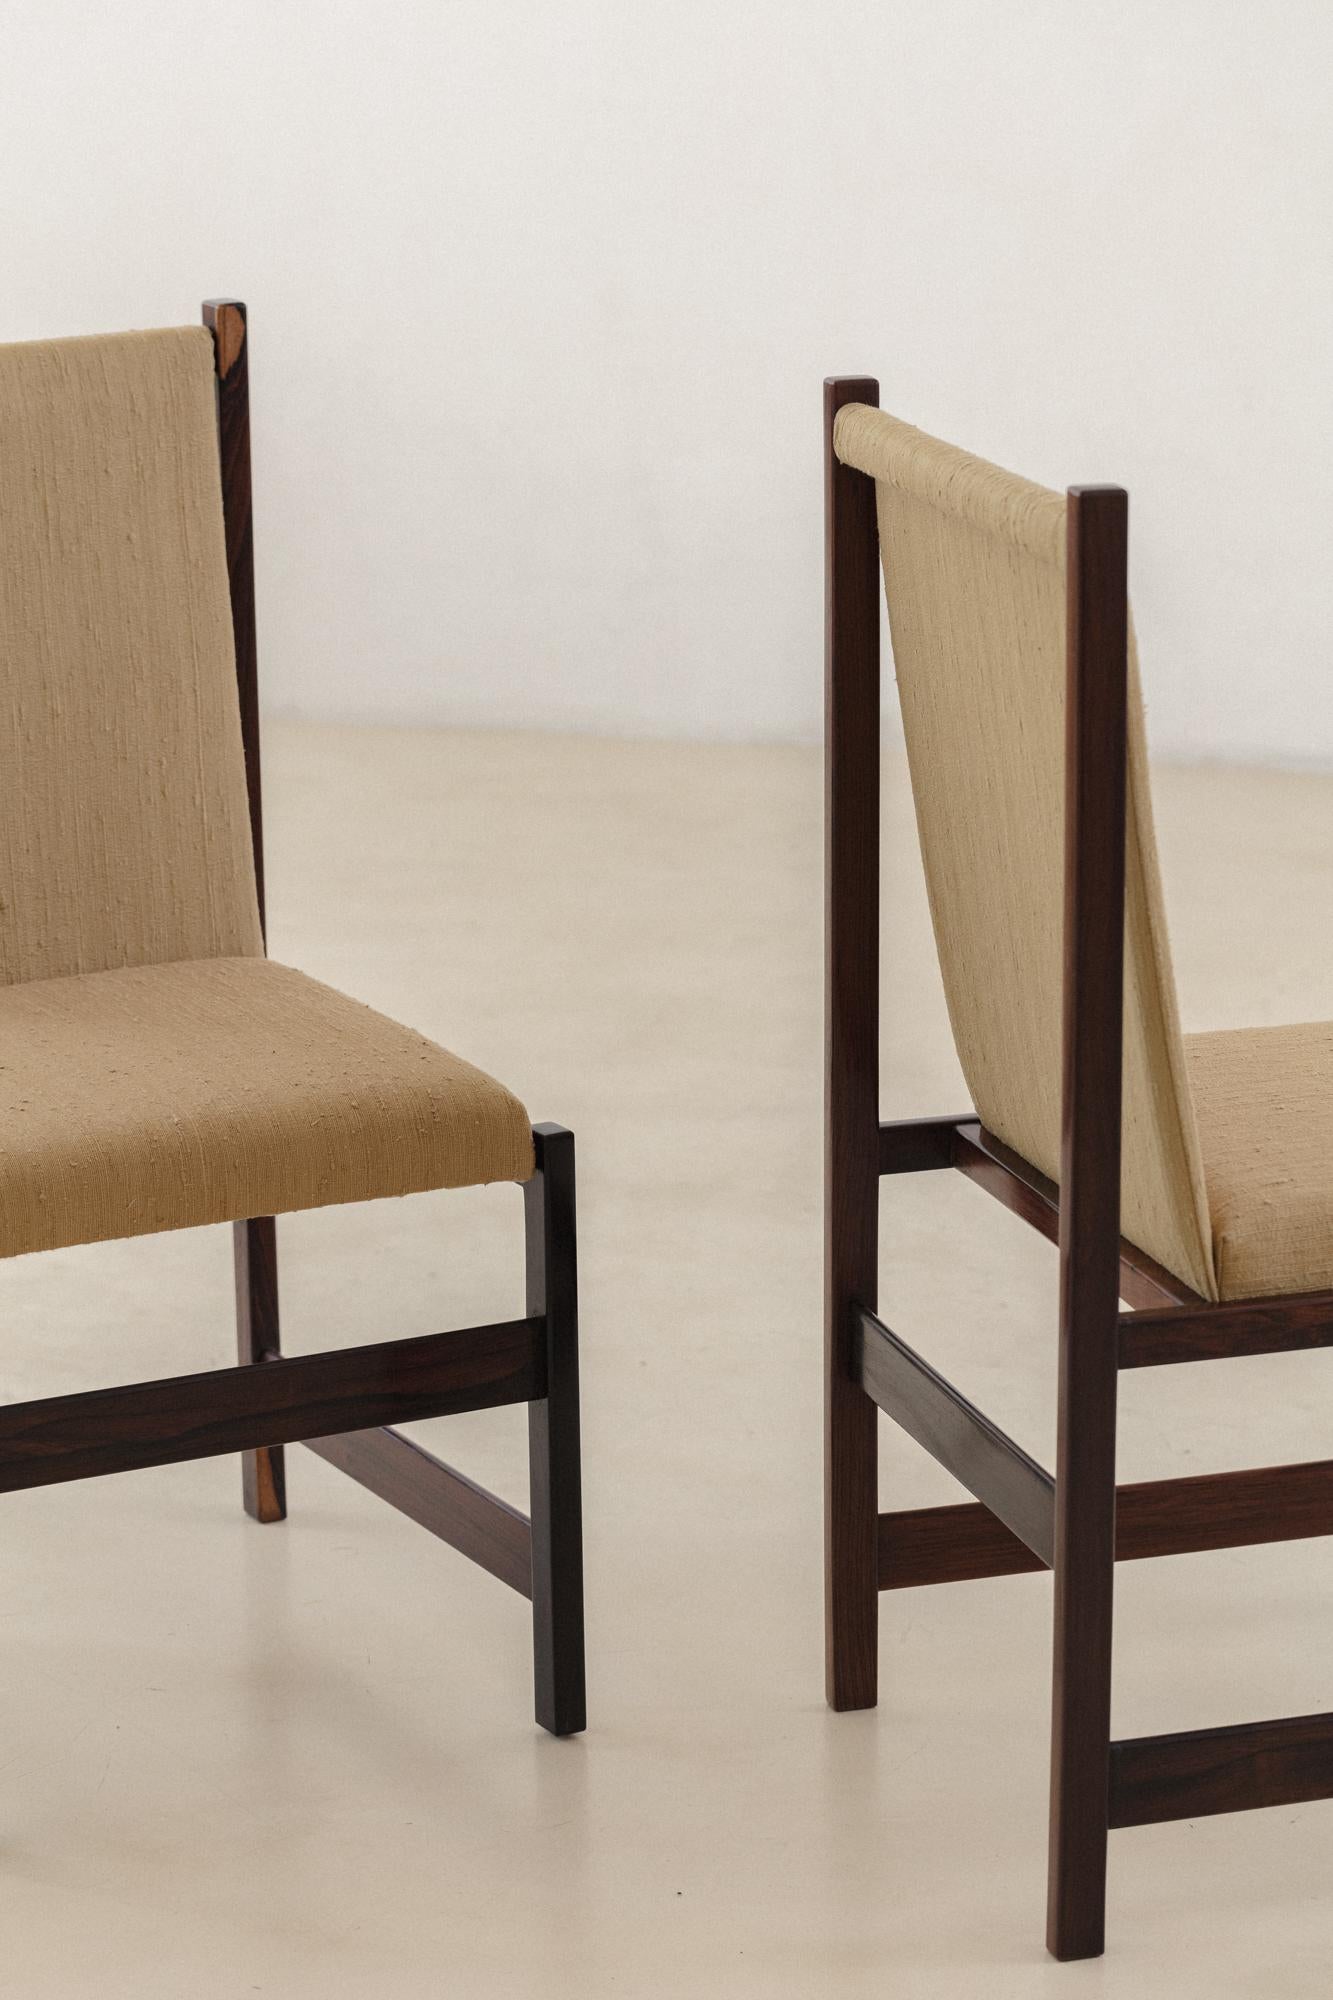 Set of 10 Rosewood Dining Chairs, Celina Decorações, Brazilian Midcentury, 1960s For Sale 4